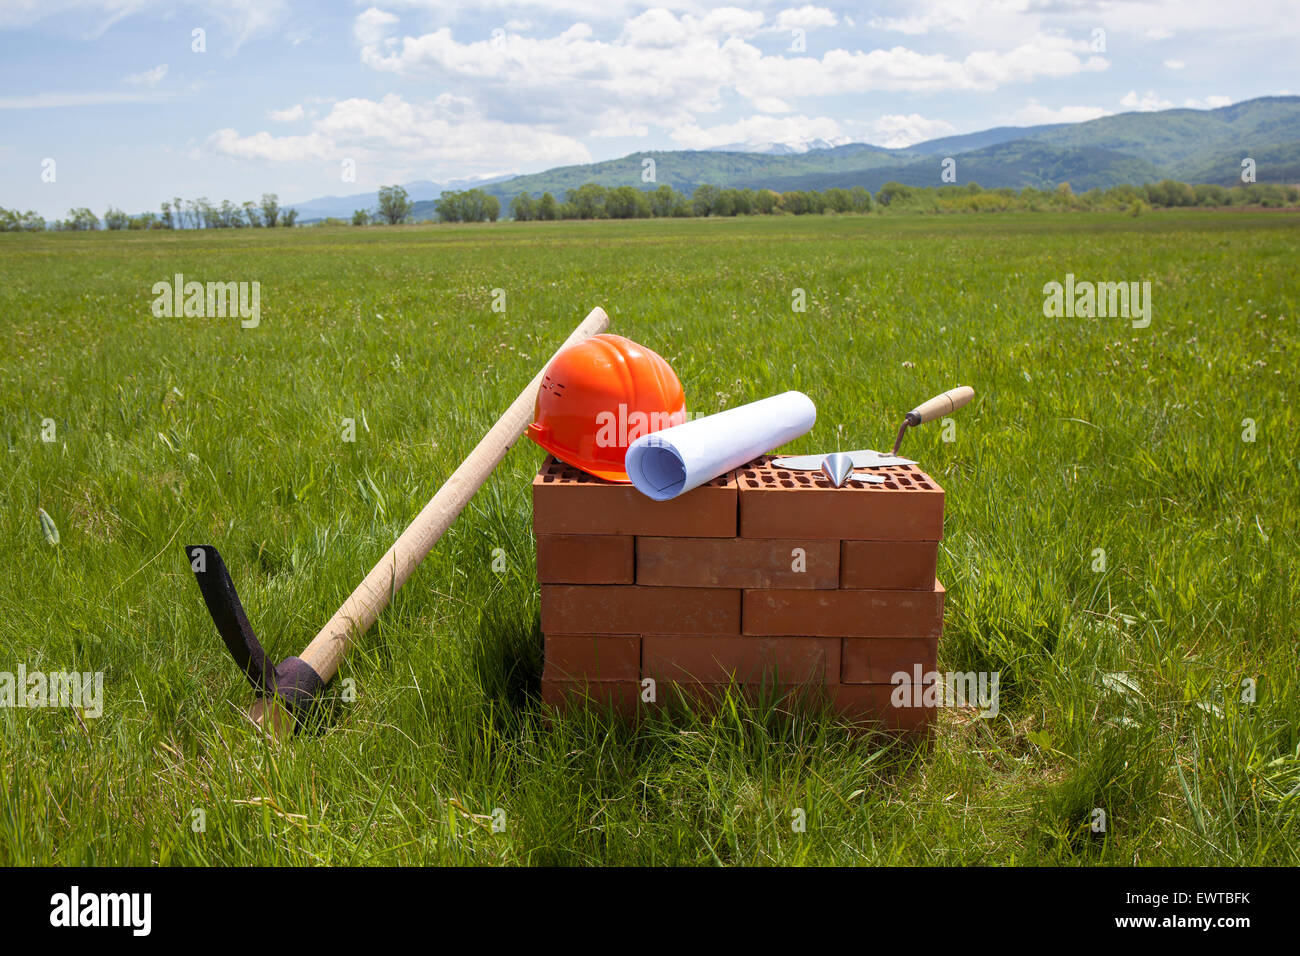 Bricks, trowel, blueprint on a roll, plummet, pick axe and hardhat prepared for beginning of construction of a new building. The Stock Photo